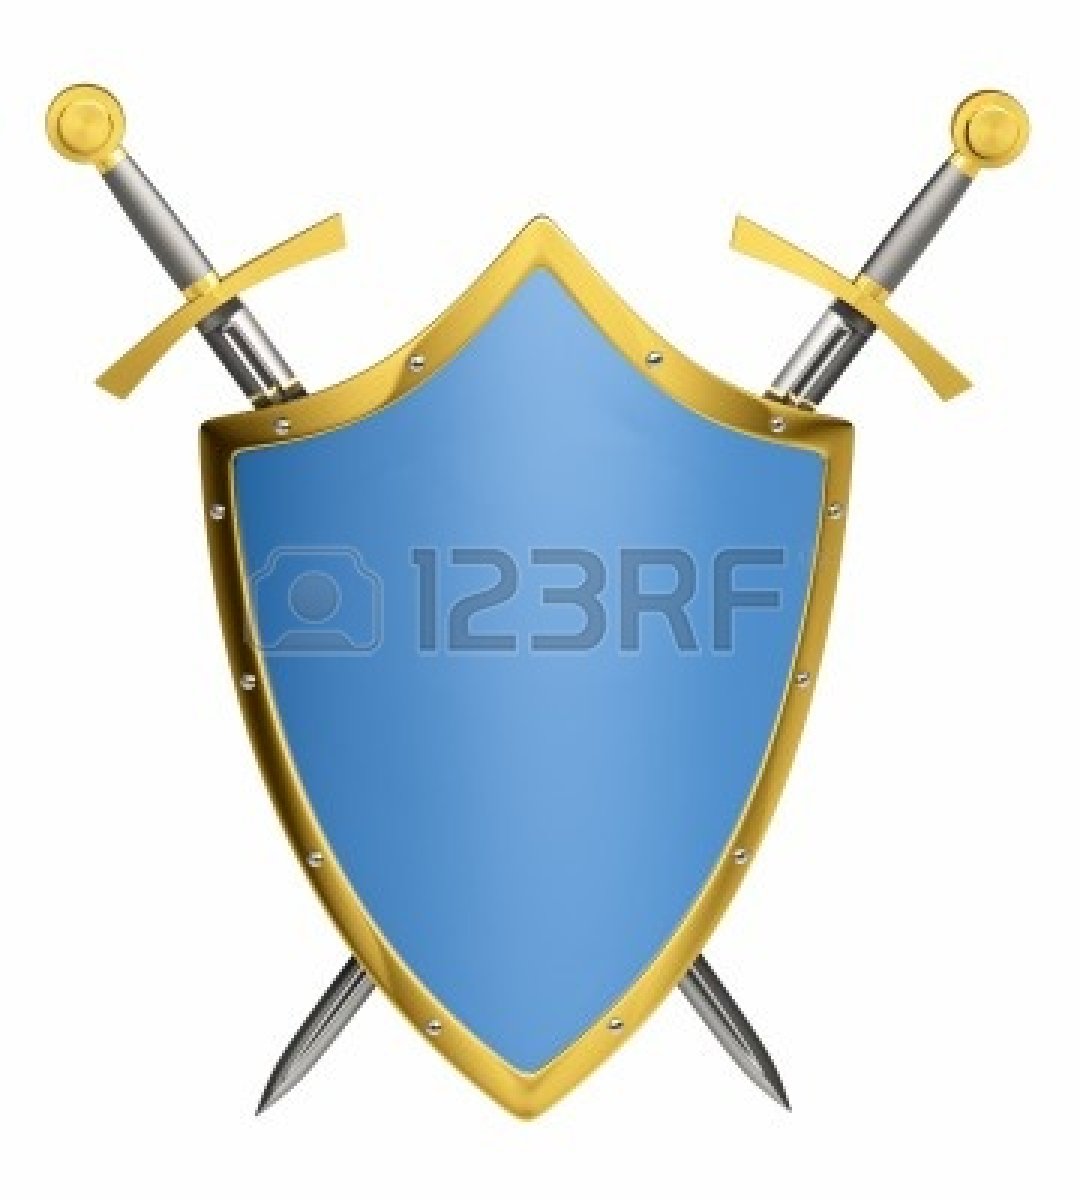 Medieval Sword And Shield   Clipart Panda   Free Clipart Images